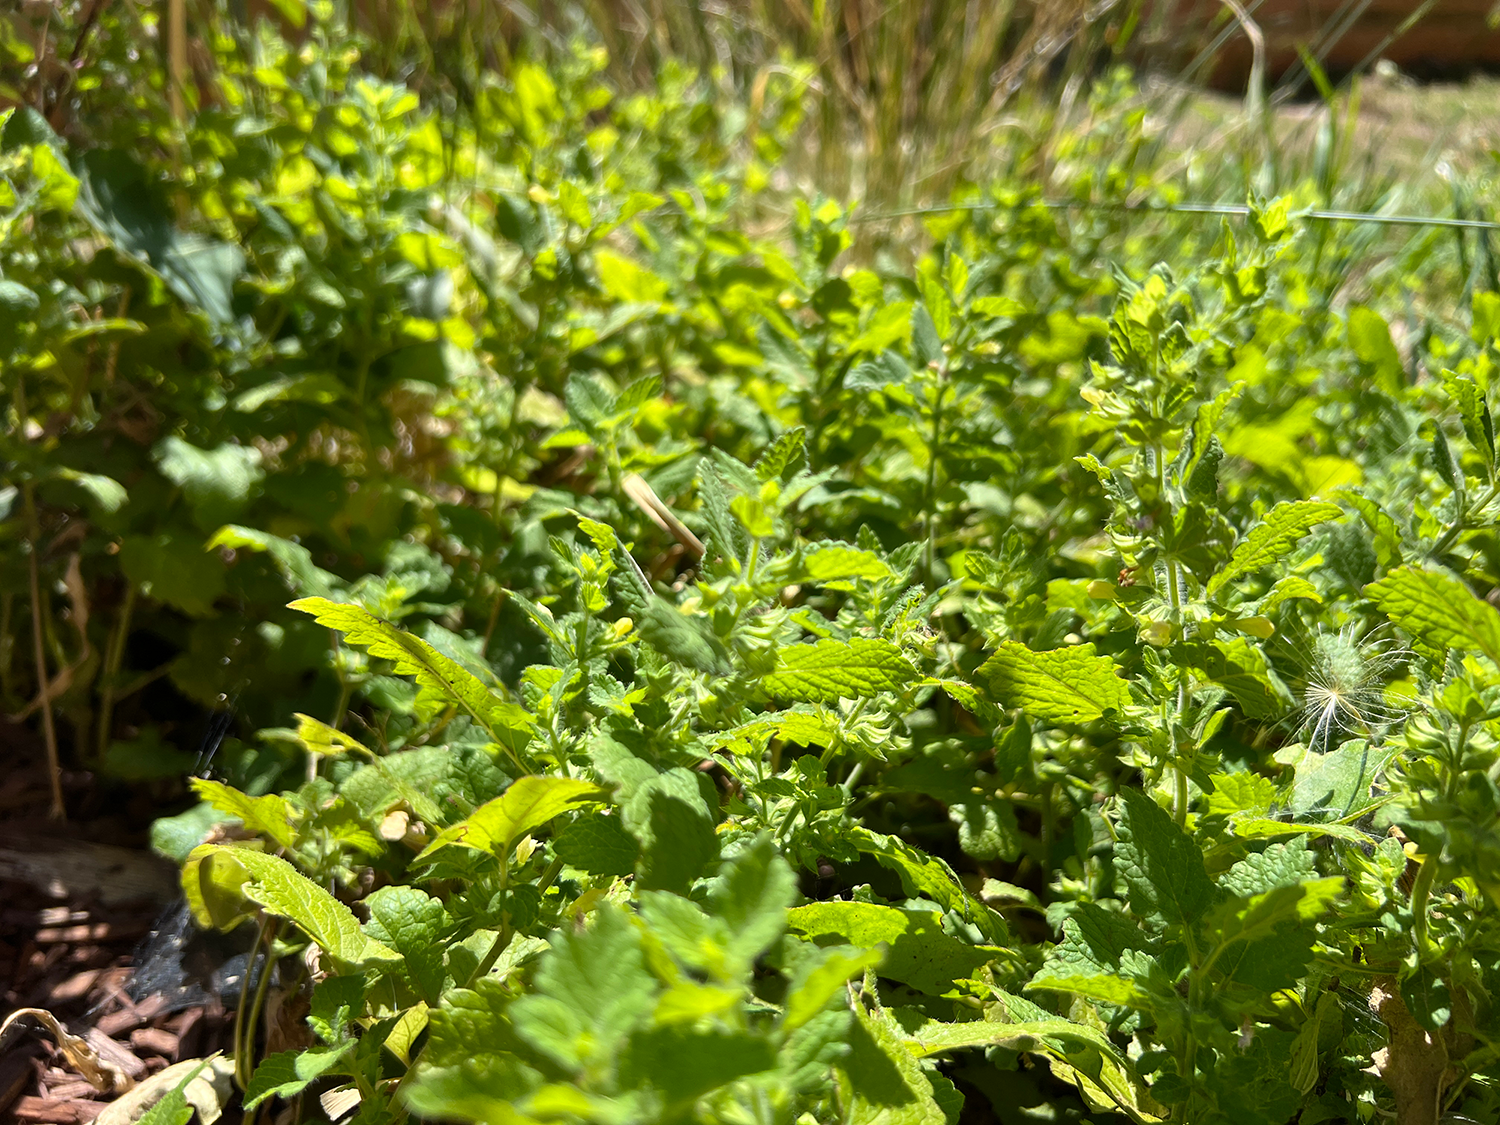 Image of Lemon Balm plant grown at Sacred Plant Co's Low Water Regenerative Colorado Farm, known for sustainable farming practices.